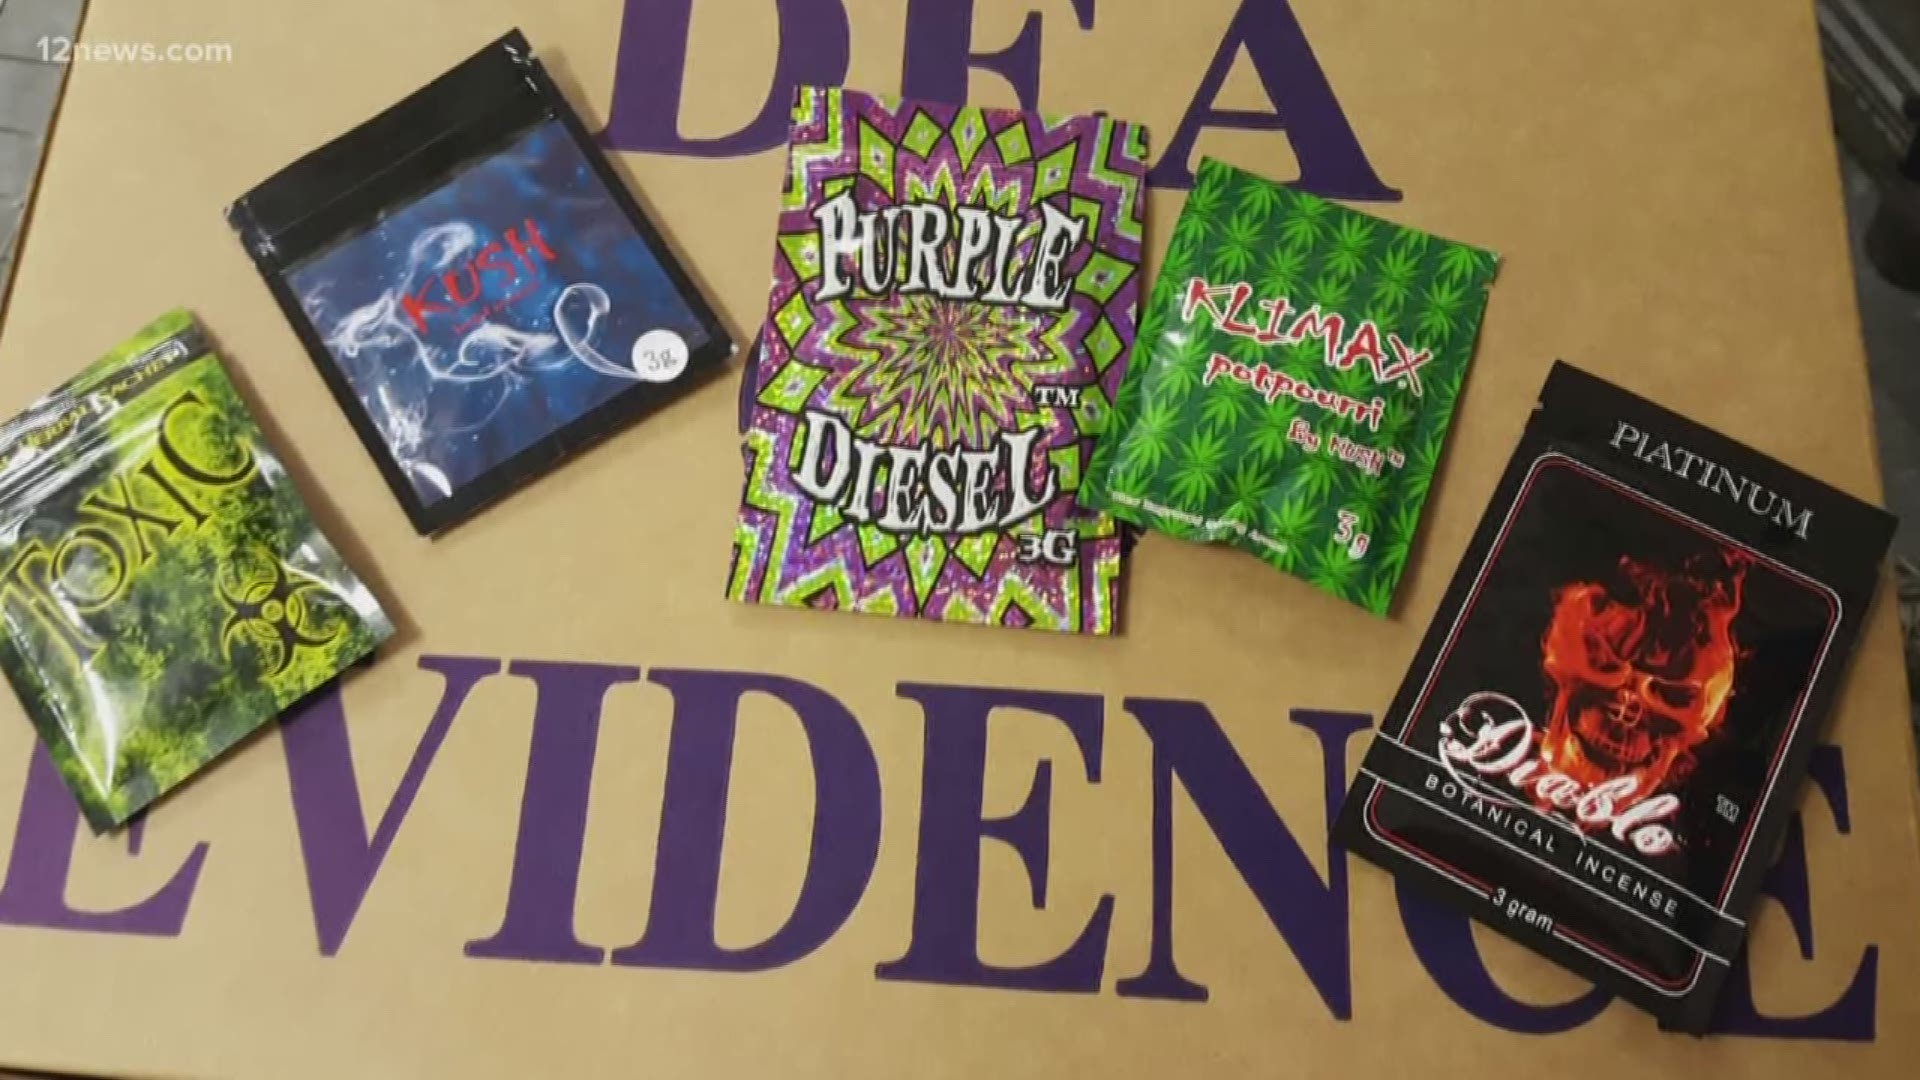 Over 70 people overdosed on synthetic marijuana, also called K-2 or spice, in New Haven recently. We look at what officials in Arizona are doing to keep the illegal drug off the streets.